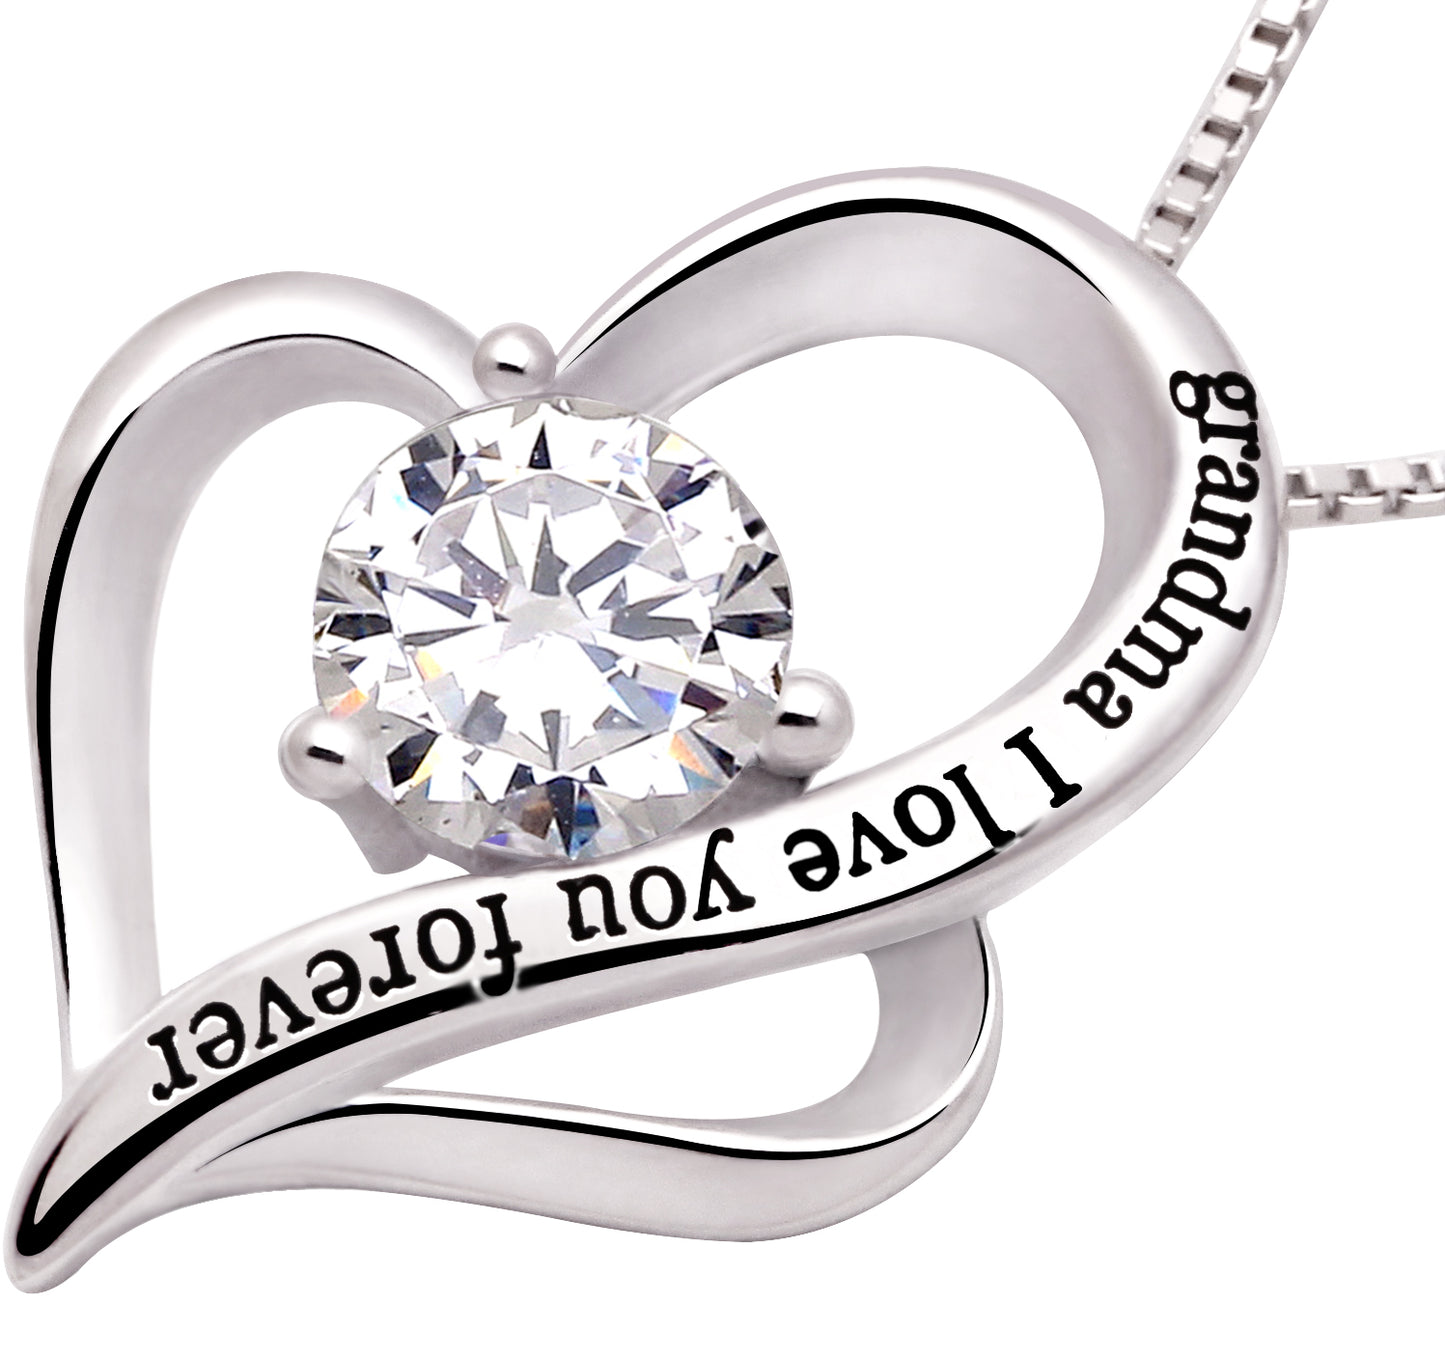 ALOV Jewelry Sterling Silver "grandma I love you forever" Love Heart Cubic Zirconia Pendant Necklace